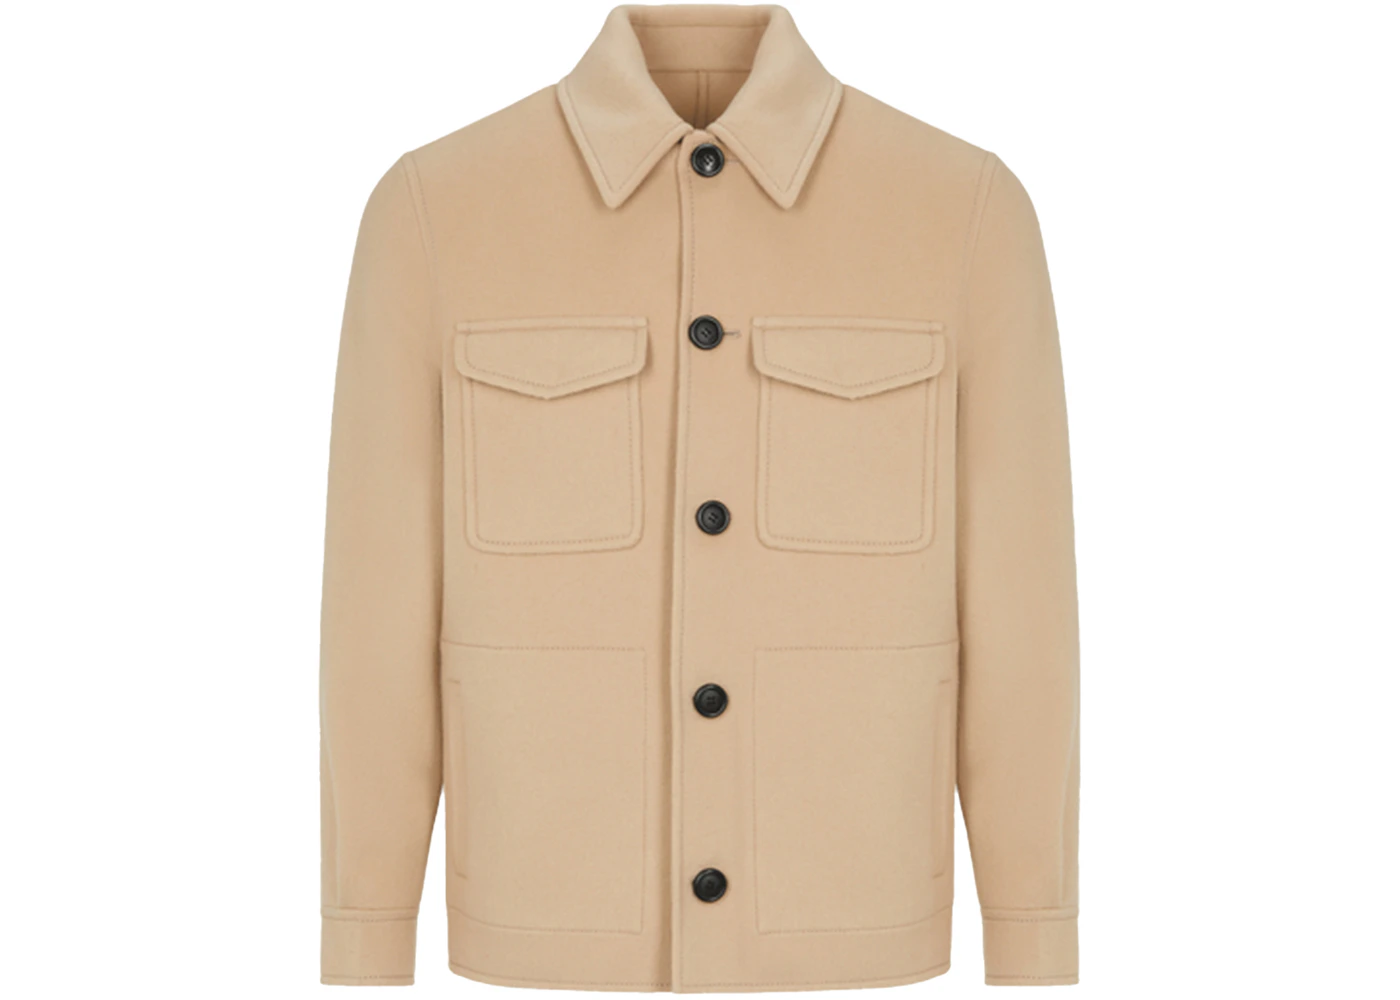 Ami Paris Wool and Cashmere Overshirt Champagne/Black Men's - US